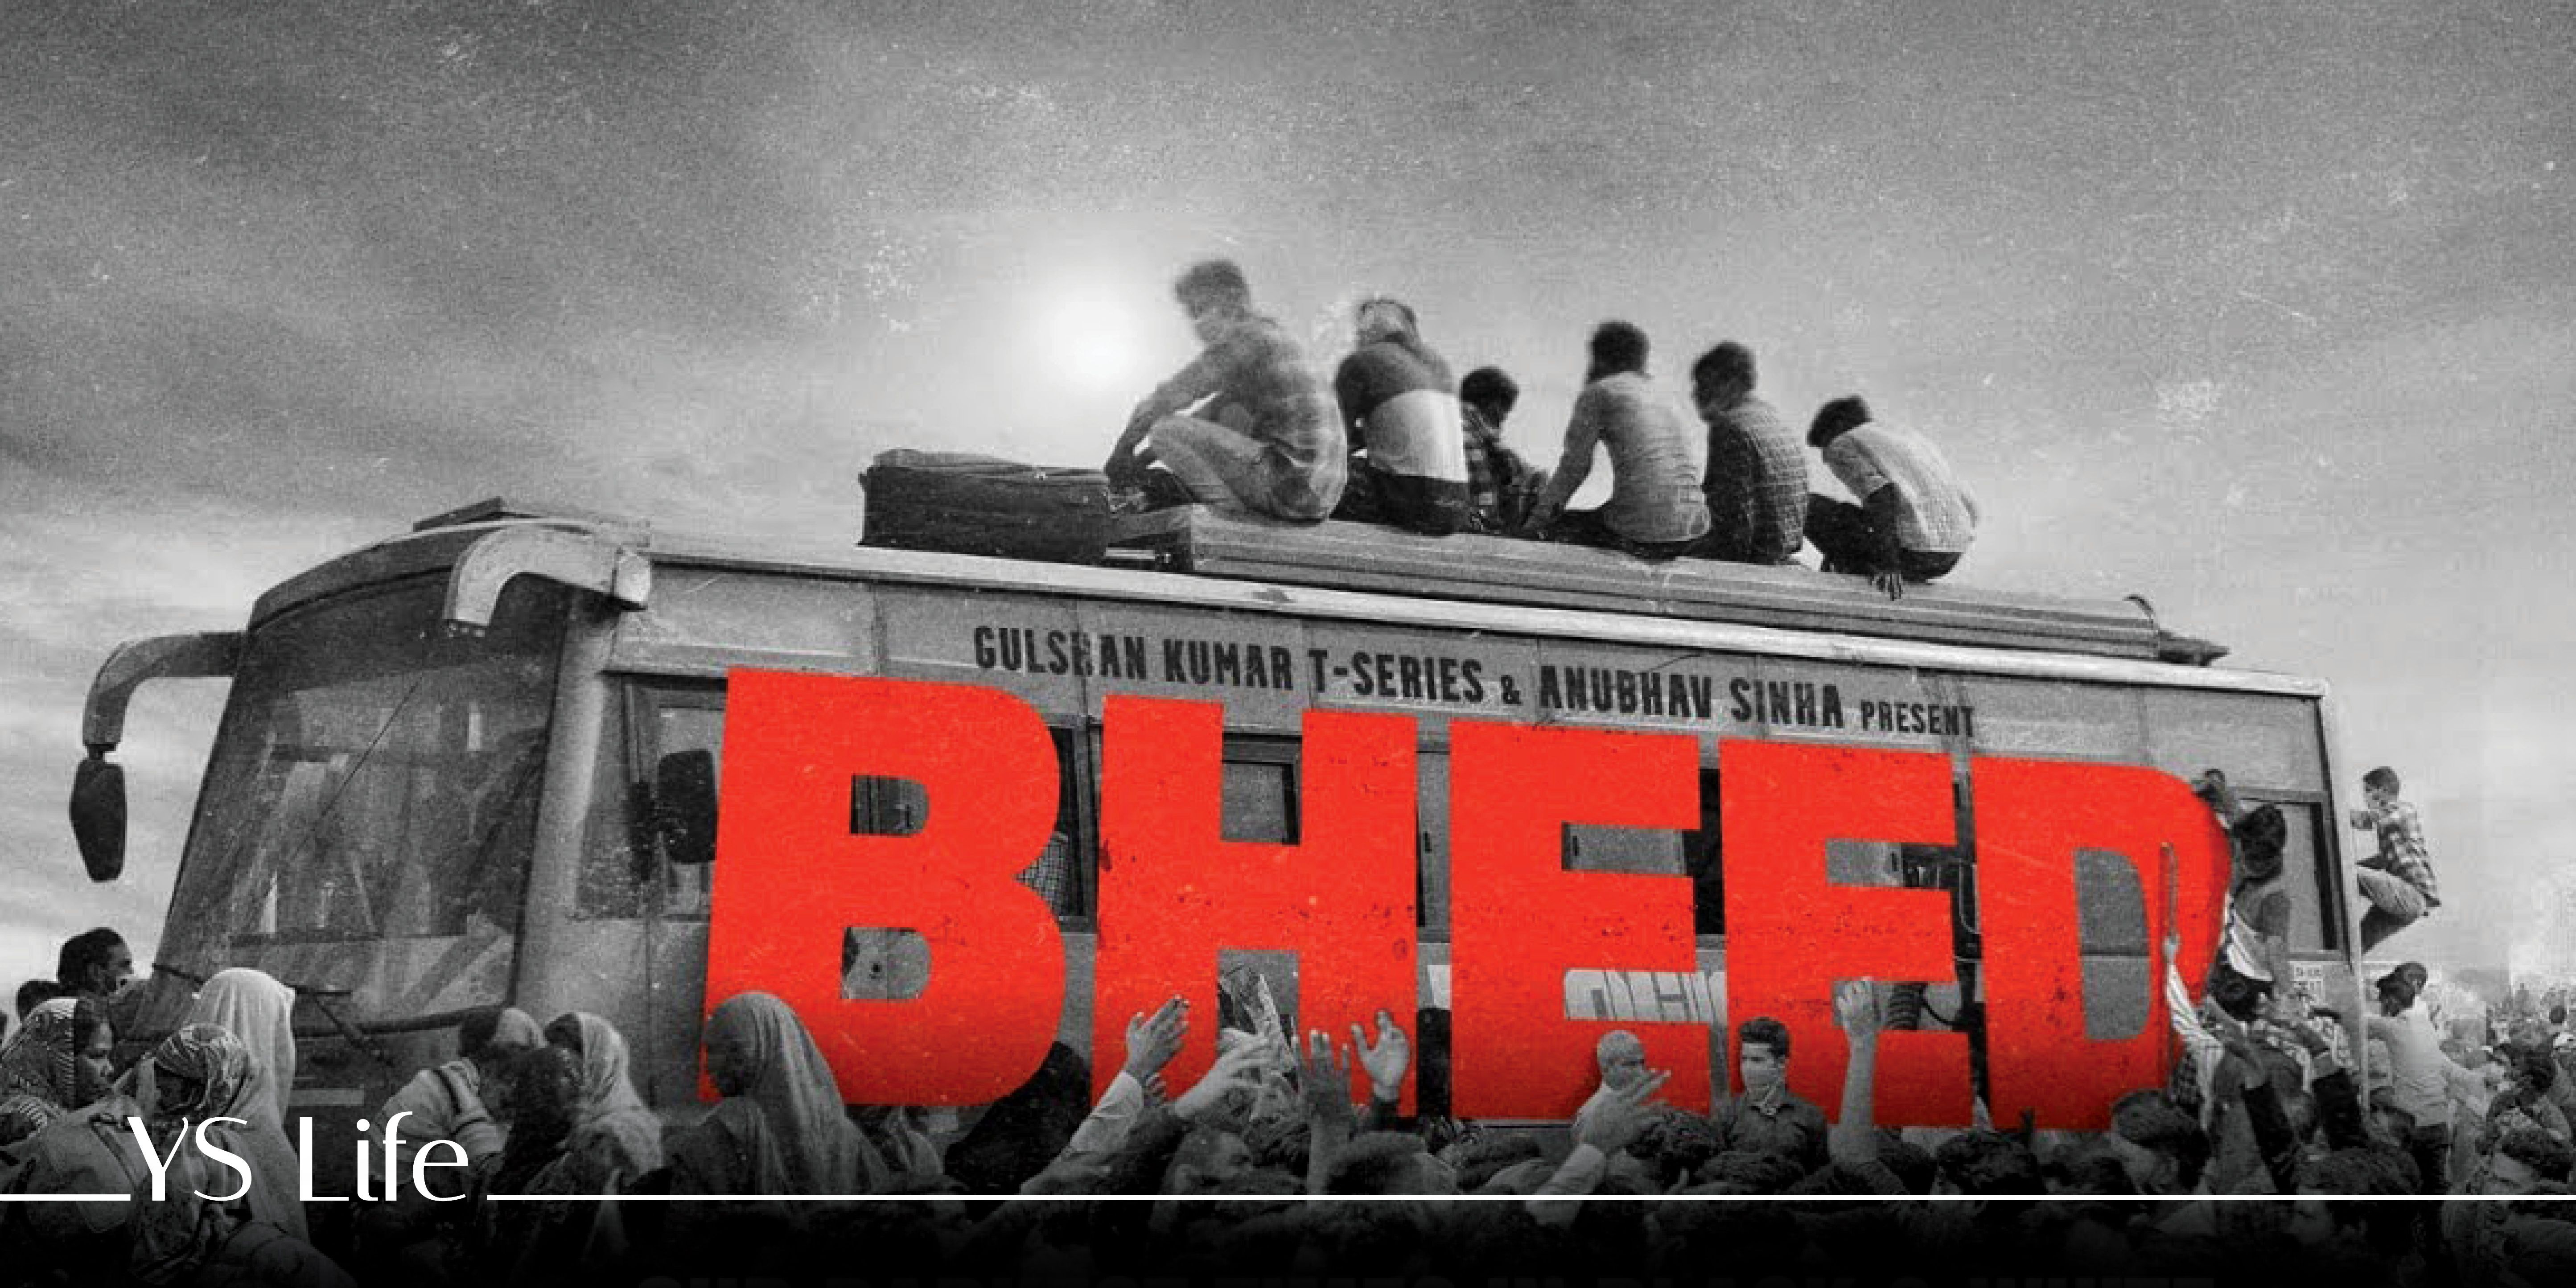 Anubhav Sinha’s ‘Bheed’ delivers a brash reminder of mass suffering, systemic failure 